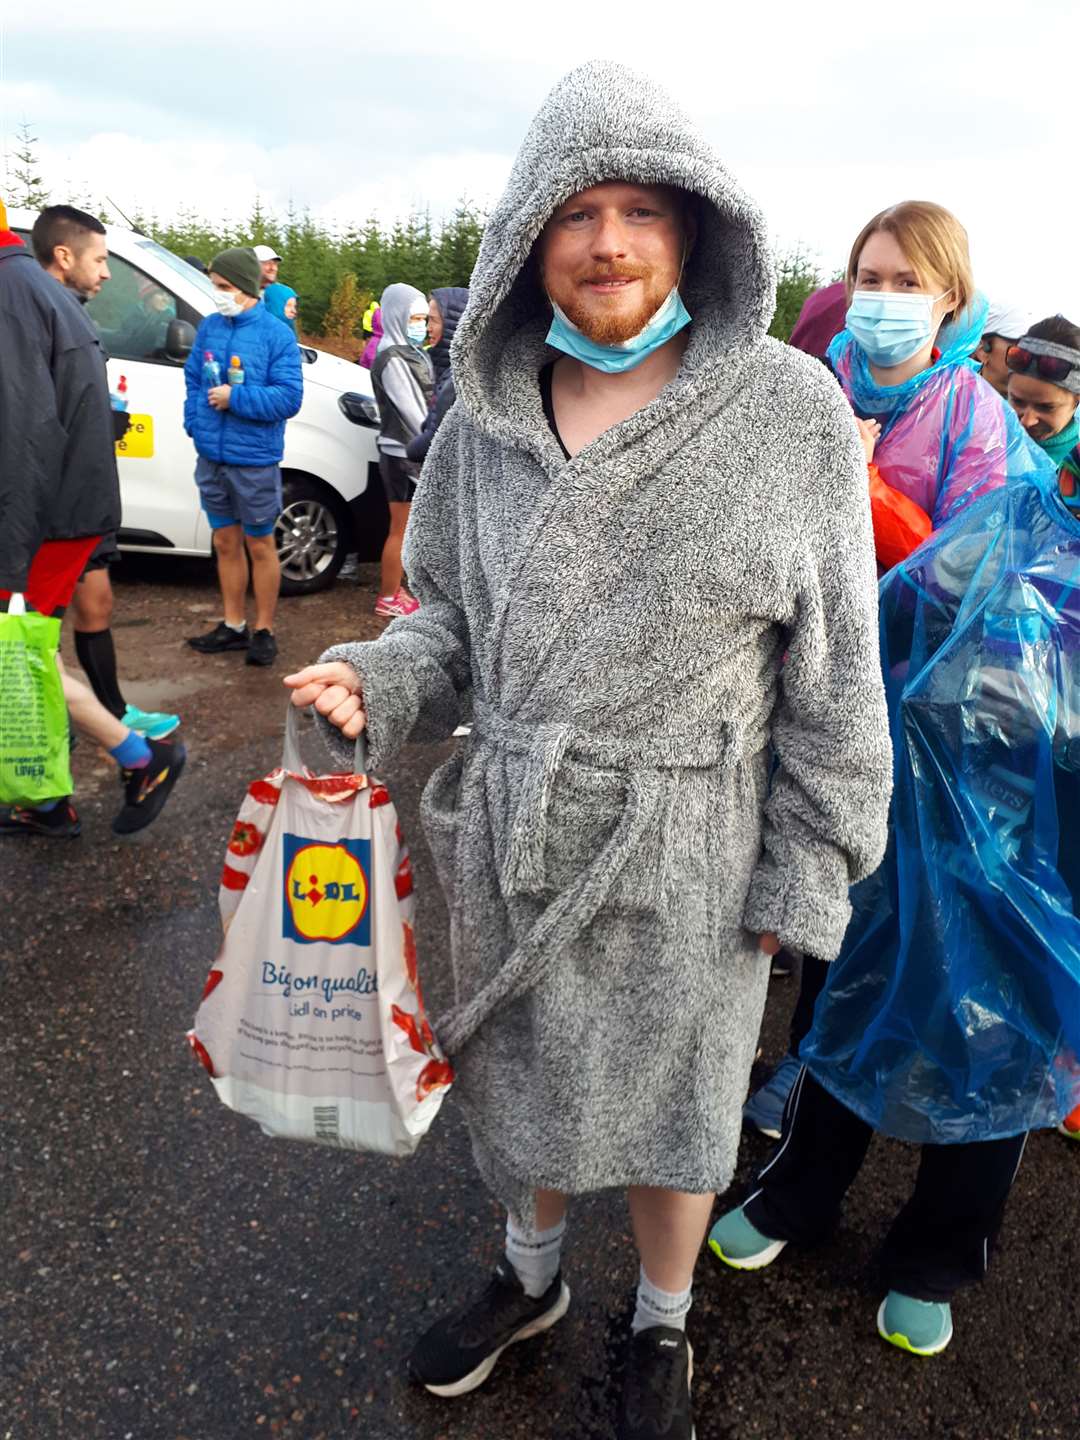 Dressed for the occasion - a fellow marathon runner dons his dressing gown.